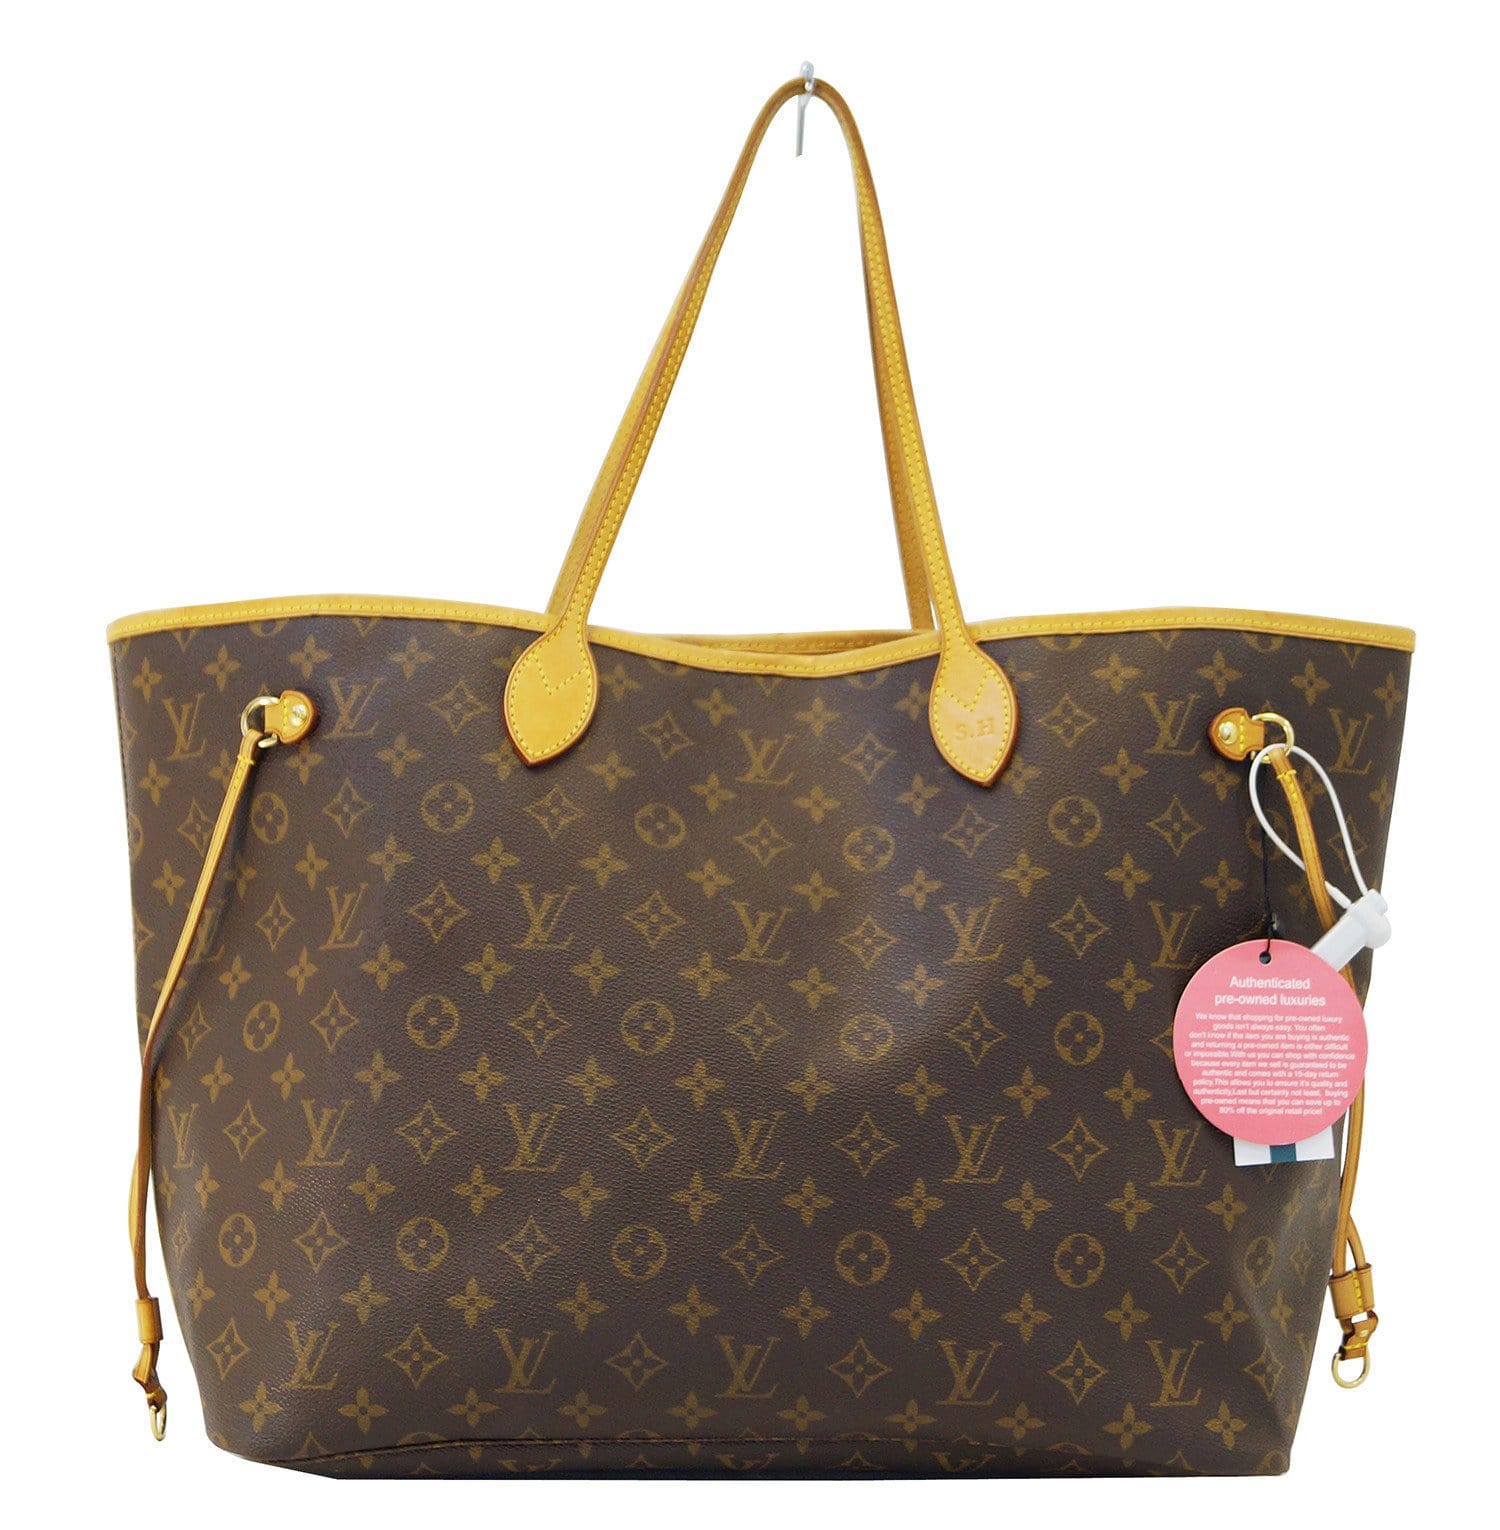 Louis Vuitton - Authenticated Neverfull Handbag - Cloth Brown for Women, Good Condition